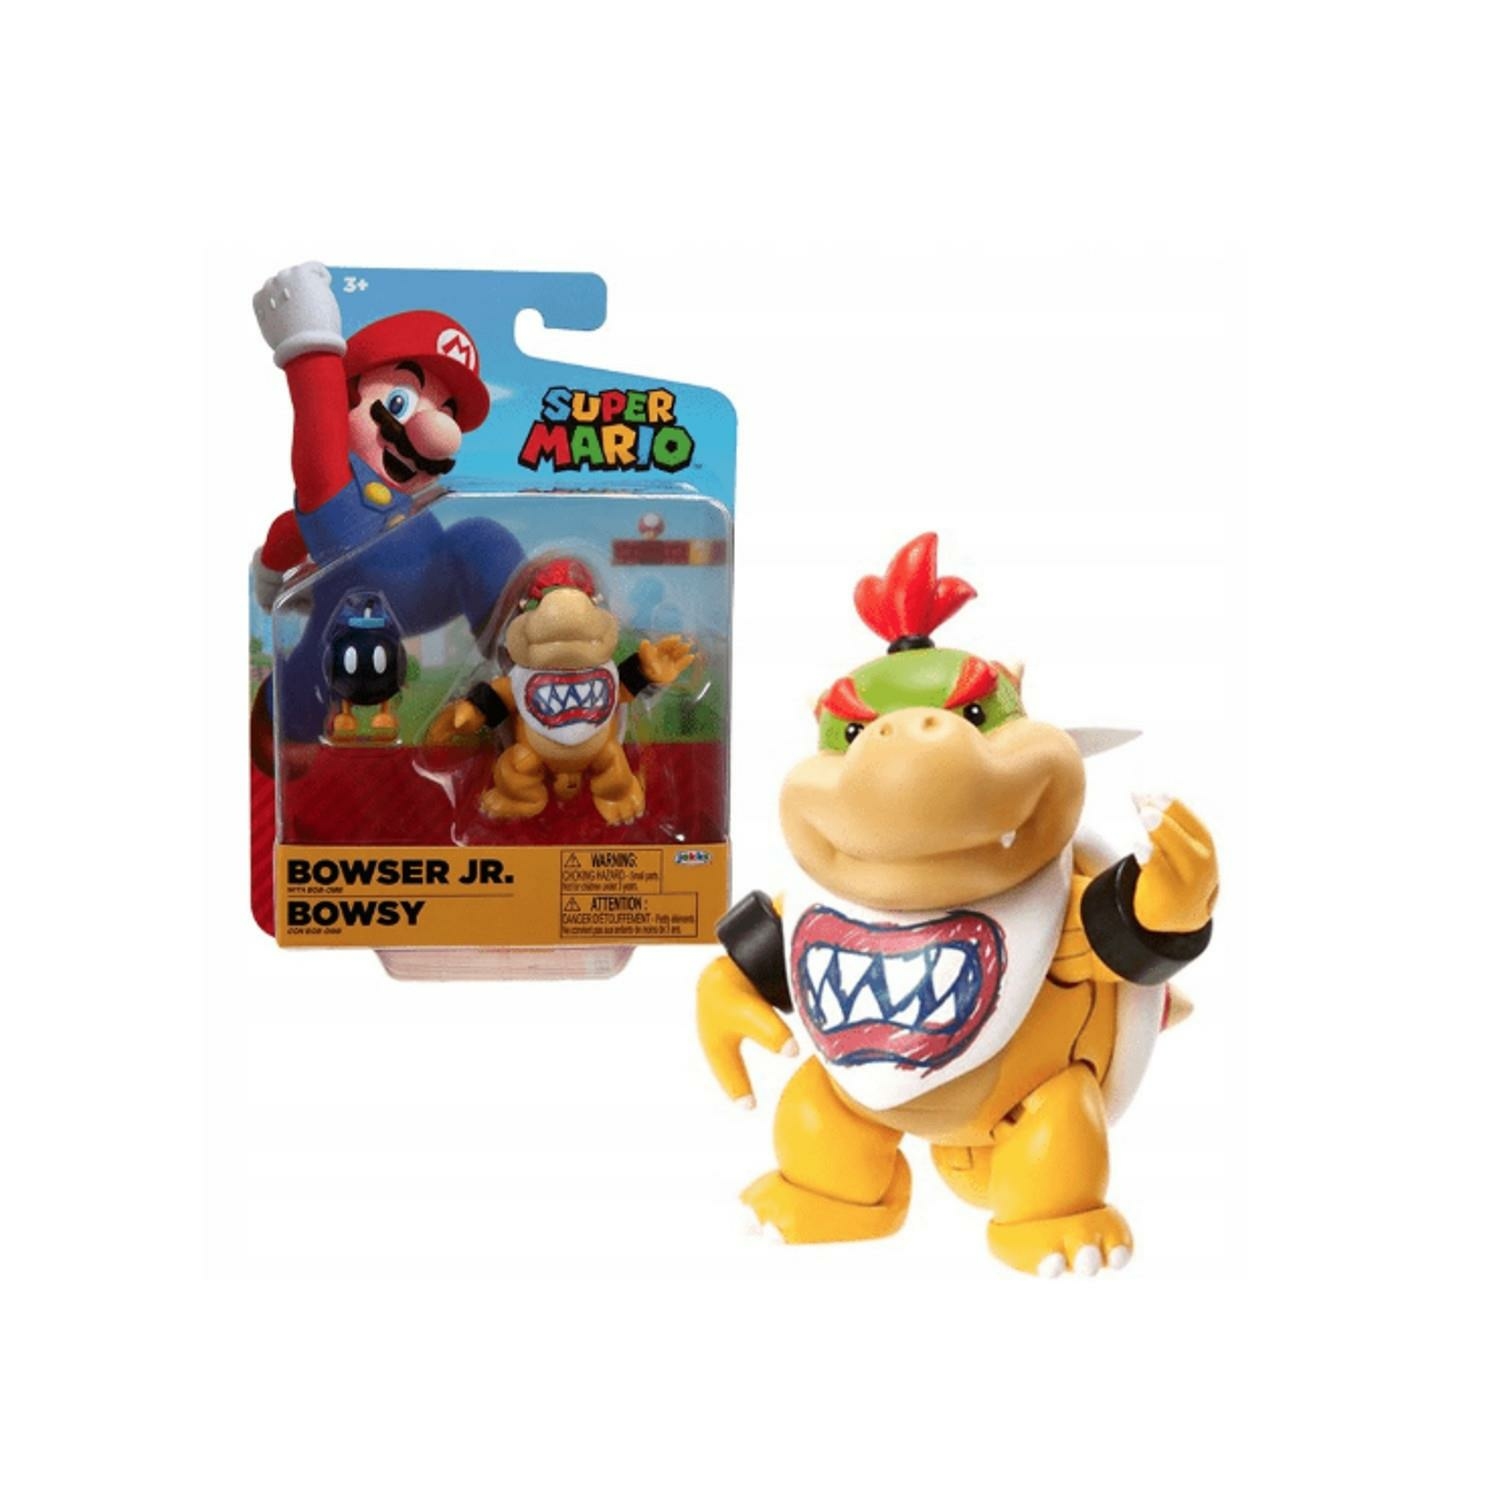 https://www.reference-gaming.com/assets/media/product/141208/nintendo-super-mario-figurine-bowser-junior-avec-bob-omb-edition-limitee-65-cm.jpg?format=product-cover-large&k=1630723608